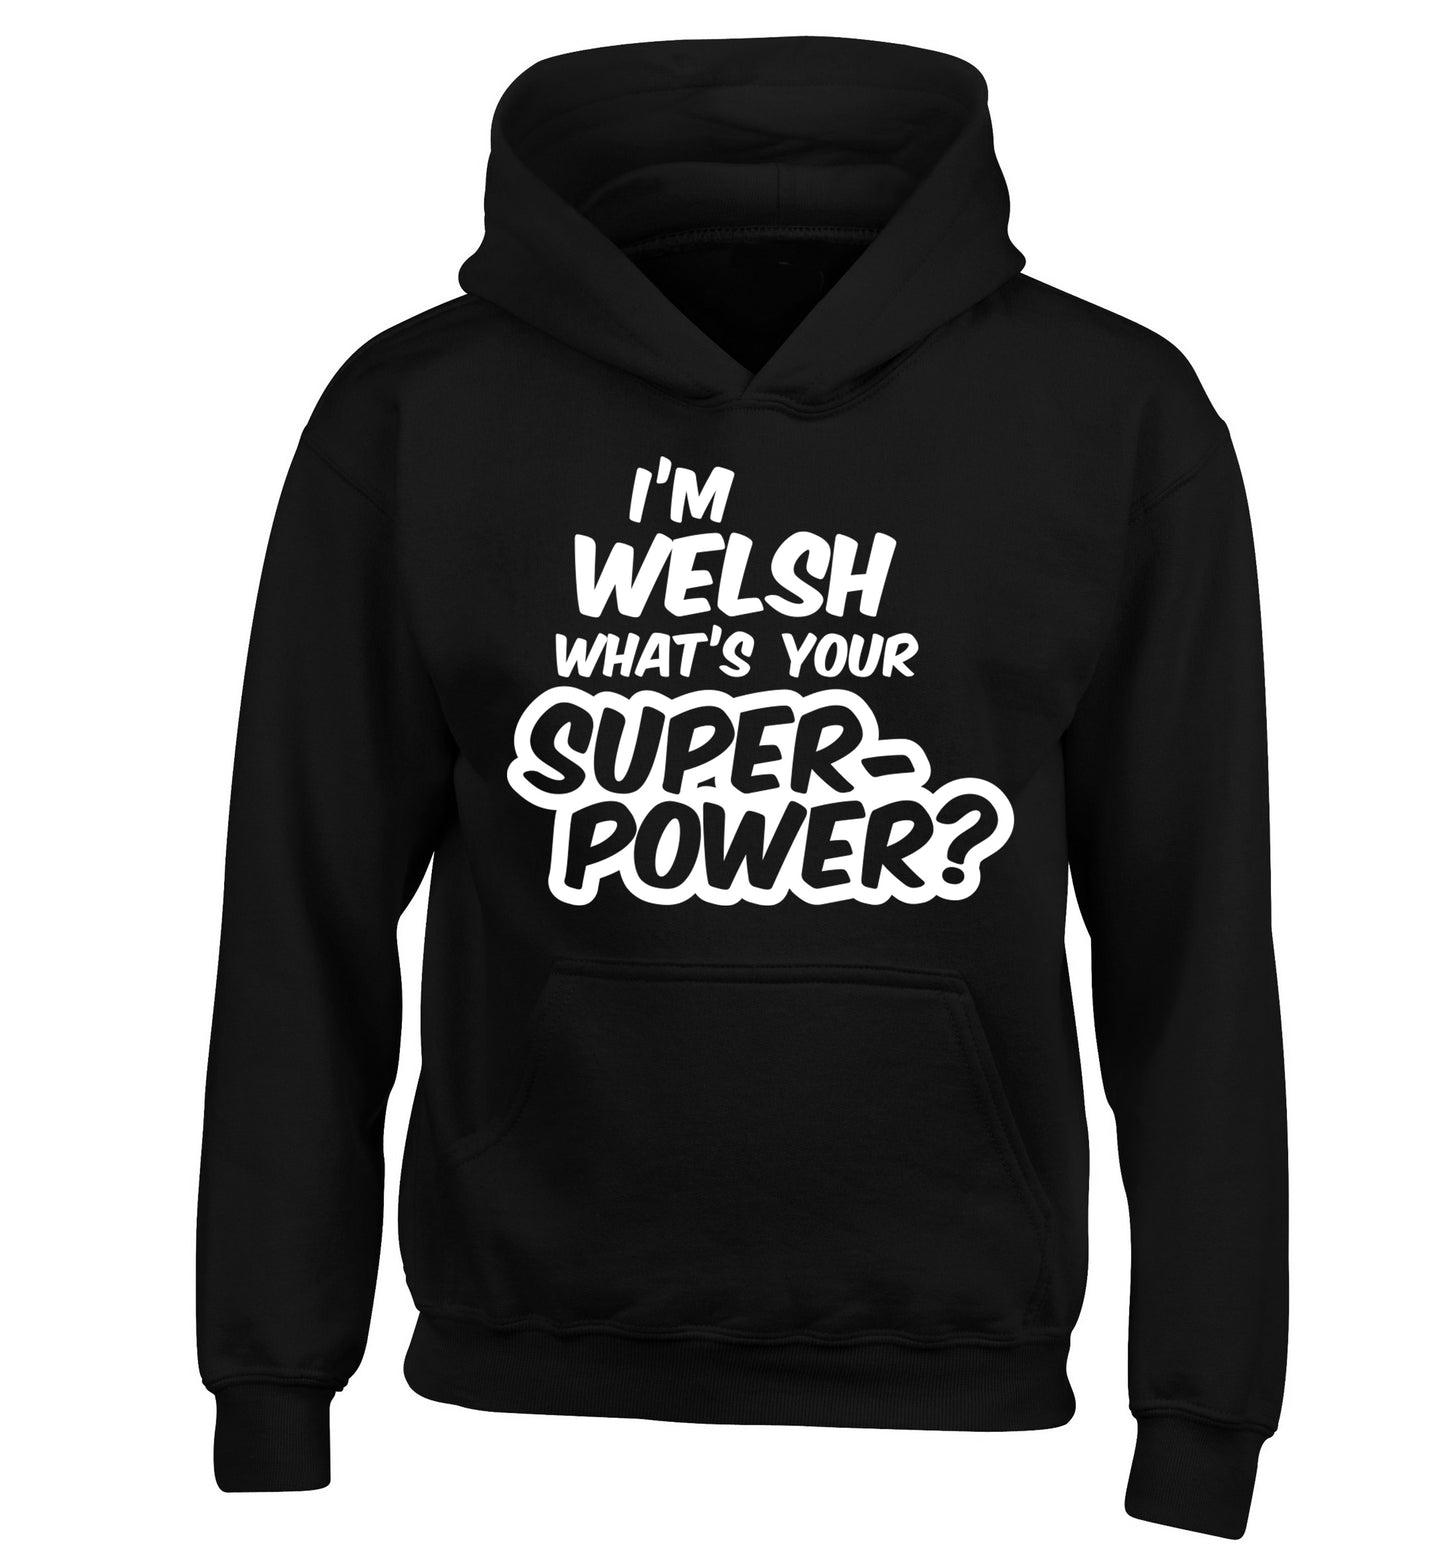 I'm Welsh what's your superpower? children's black hoodie 12-13 Years